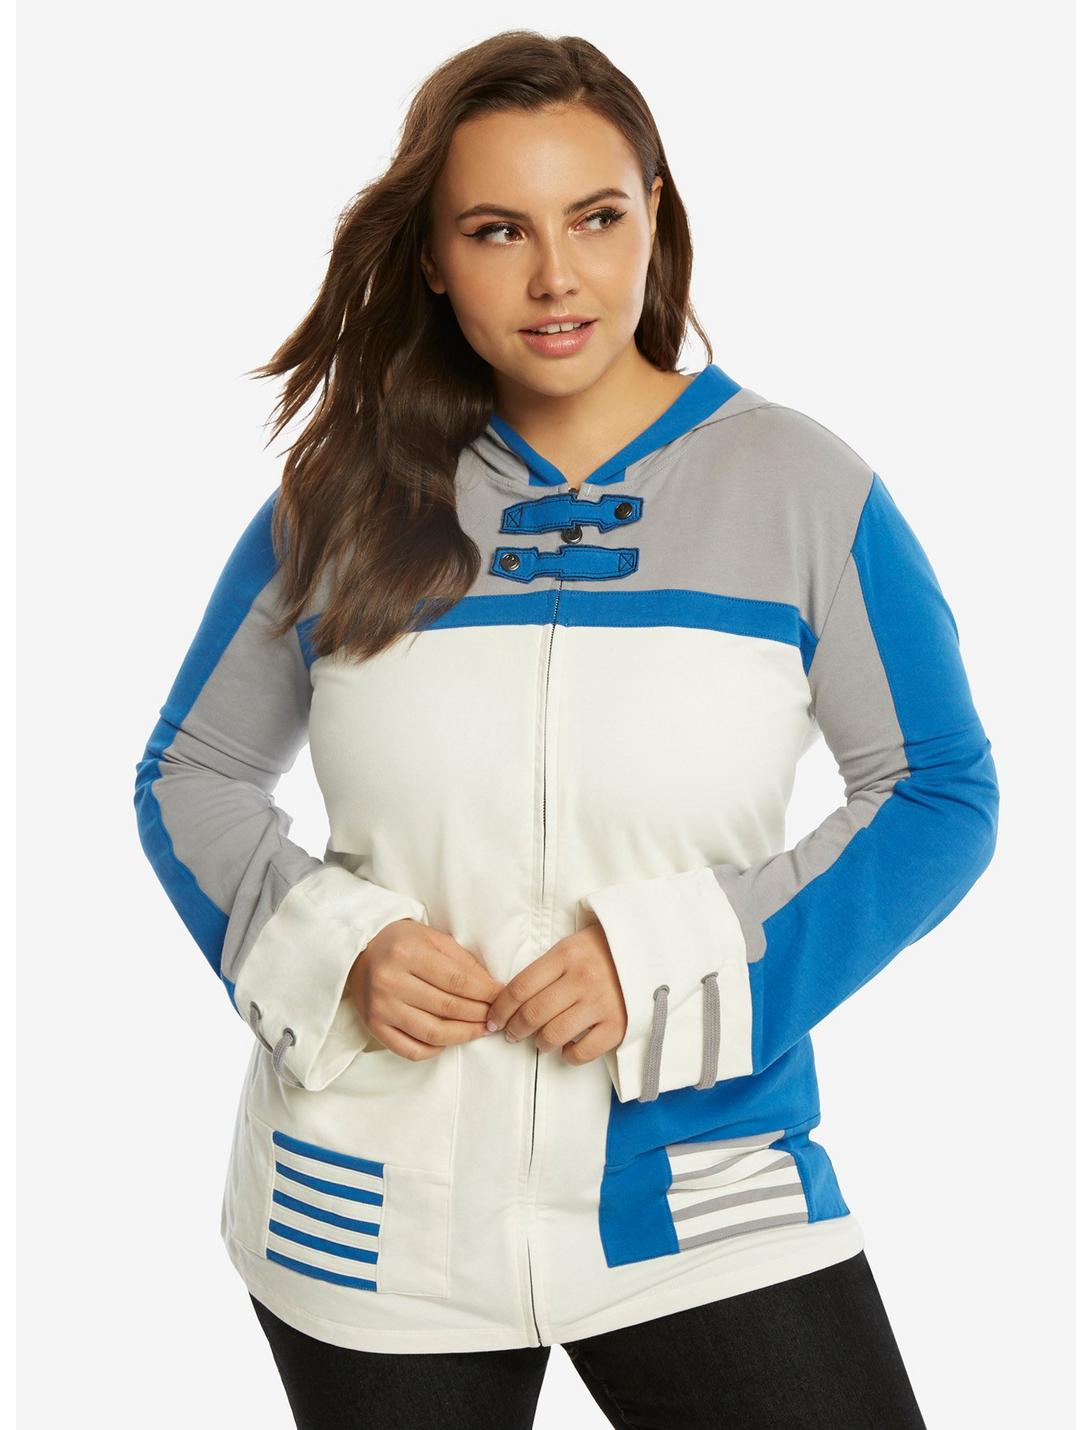 Star Wars R2-D2 Character Hoodie Plus Size, WHITE, hi-res